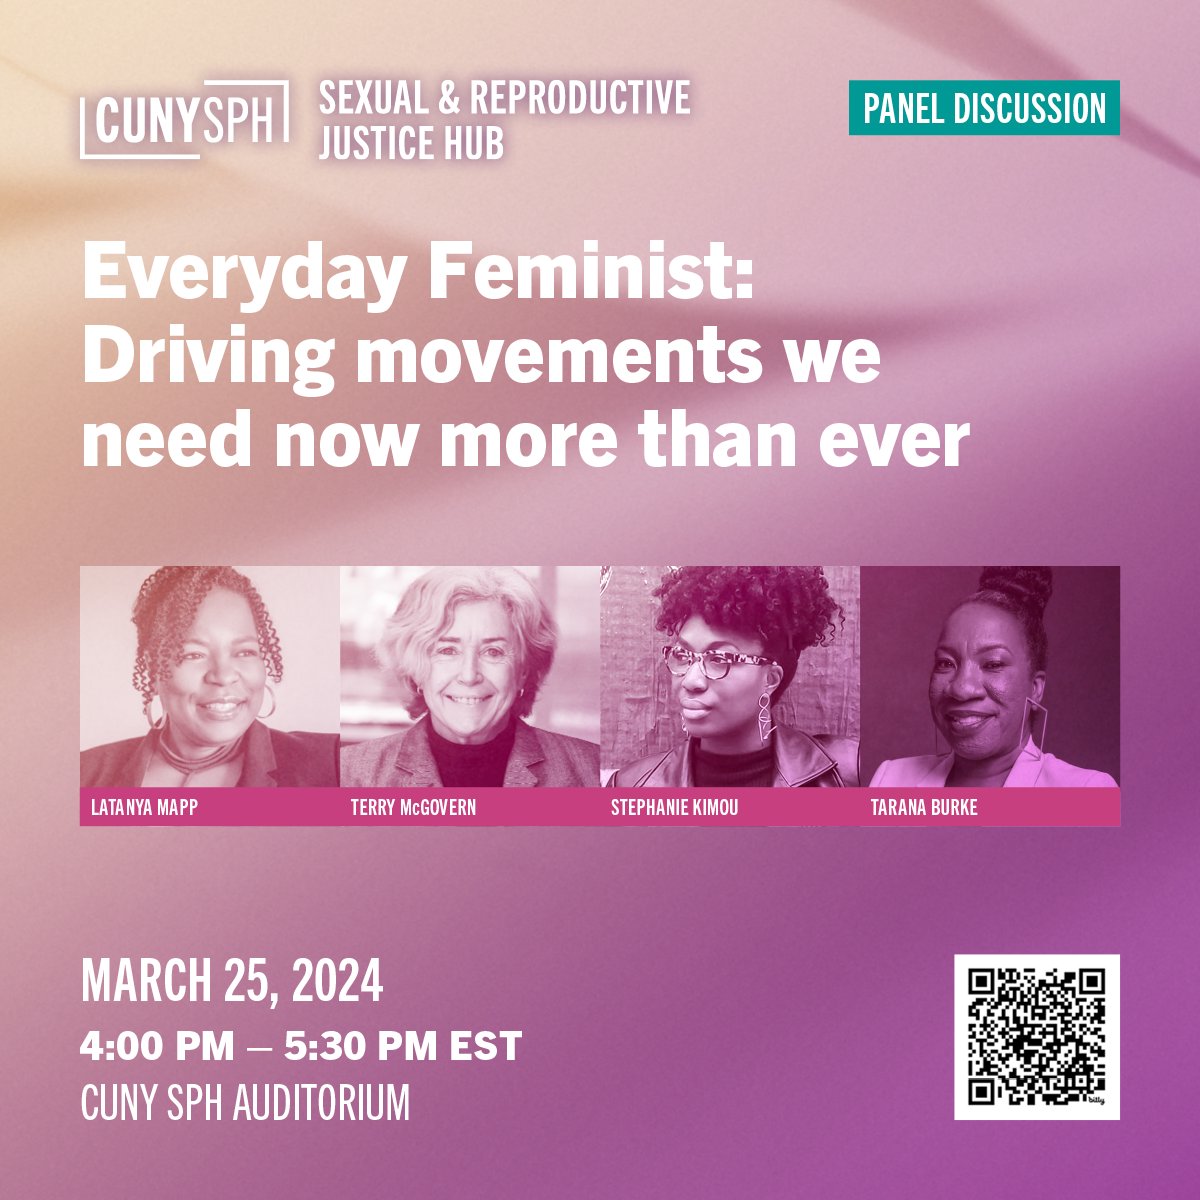 Calling all #EverydayFeminists! On Mar 25, @LatanyaFrett will be in conversation with @TerryMMcGovern, @stephanieakimou, & @TaranaBurke for a lively exploration of what strategies make feminist movements powerful. RSVP now for this online panel: eventbrite.com/e/everyday-fem…